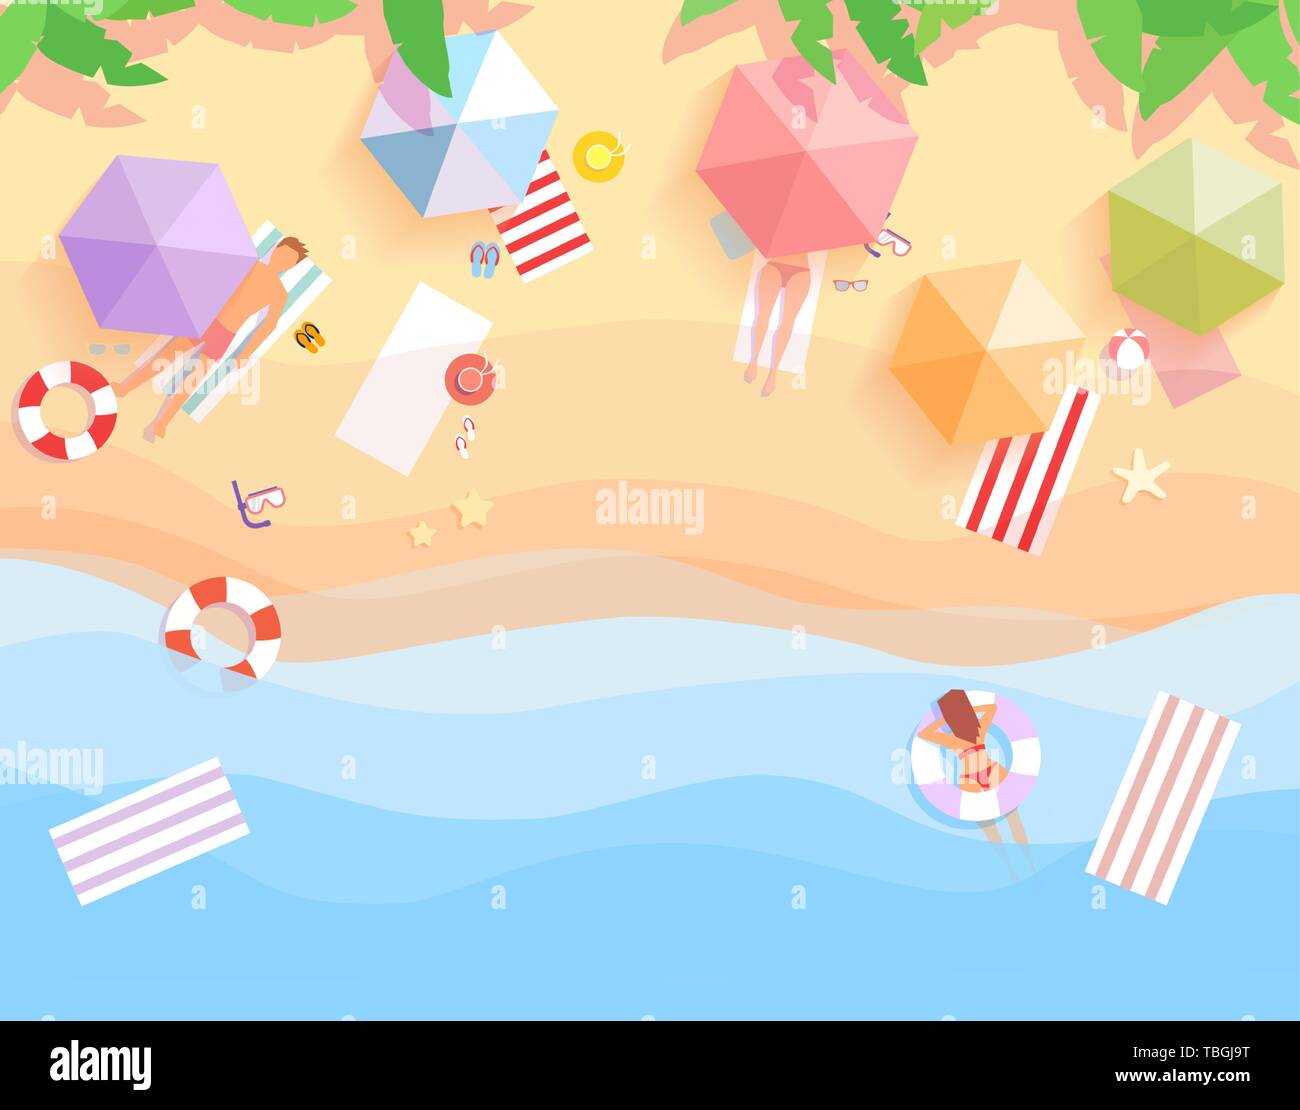 Vector top view of people relaxing on the tropical beach paradise with umbrellas, swim ring, surfboards Stock Vector